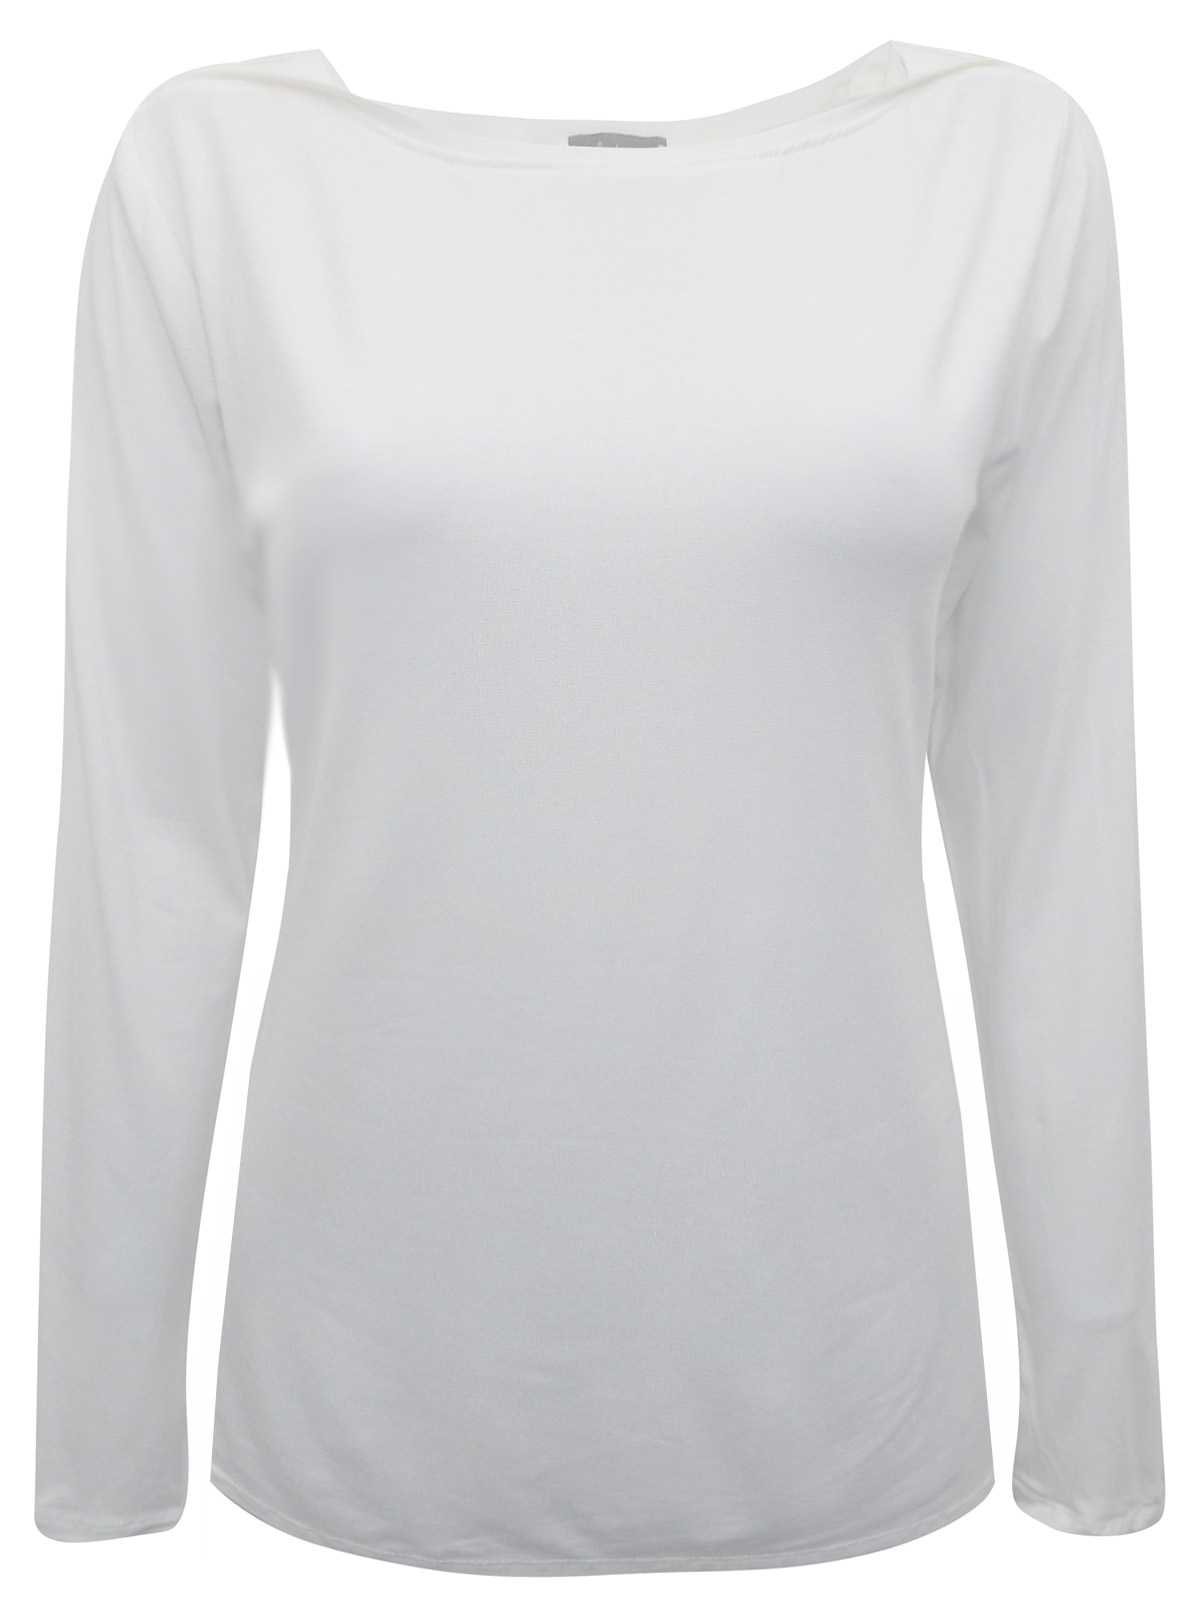 First Avenue IVORY Slash Neck Jersey Top - Size 10 to 20